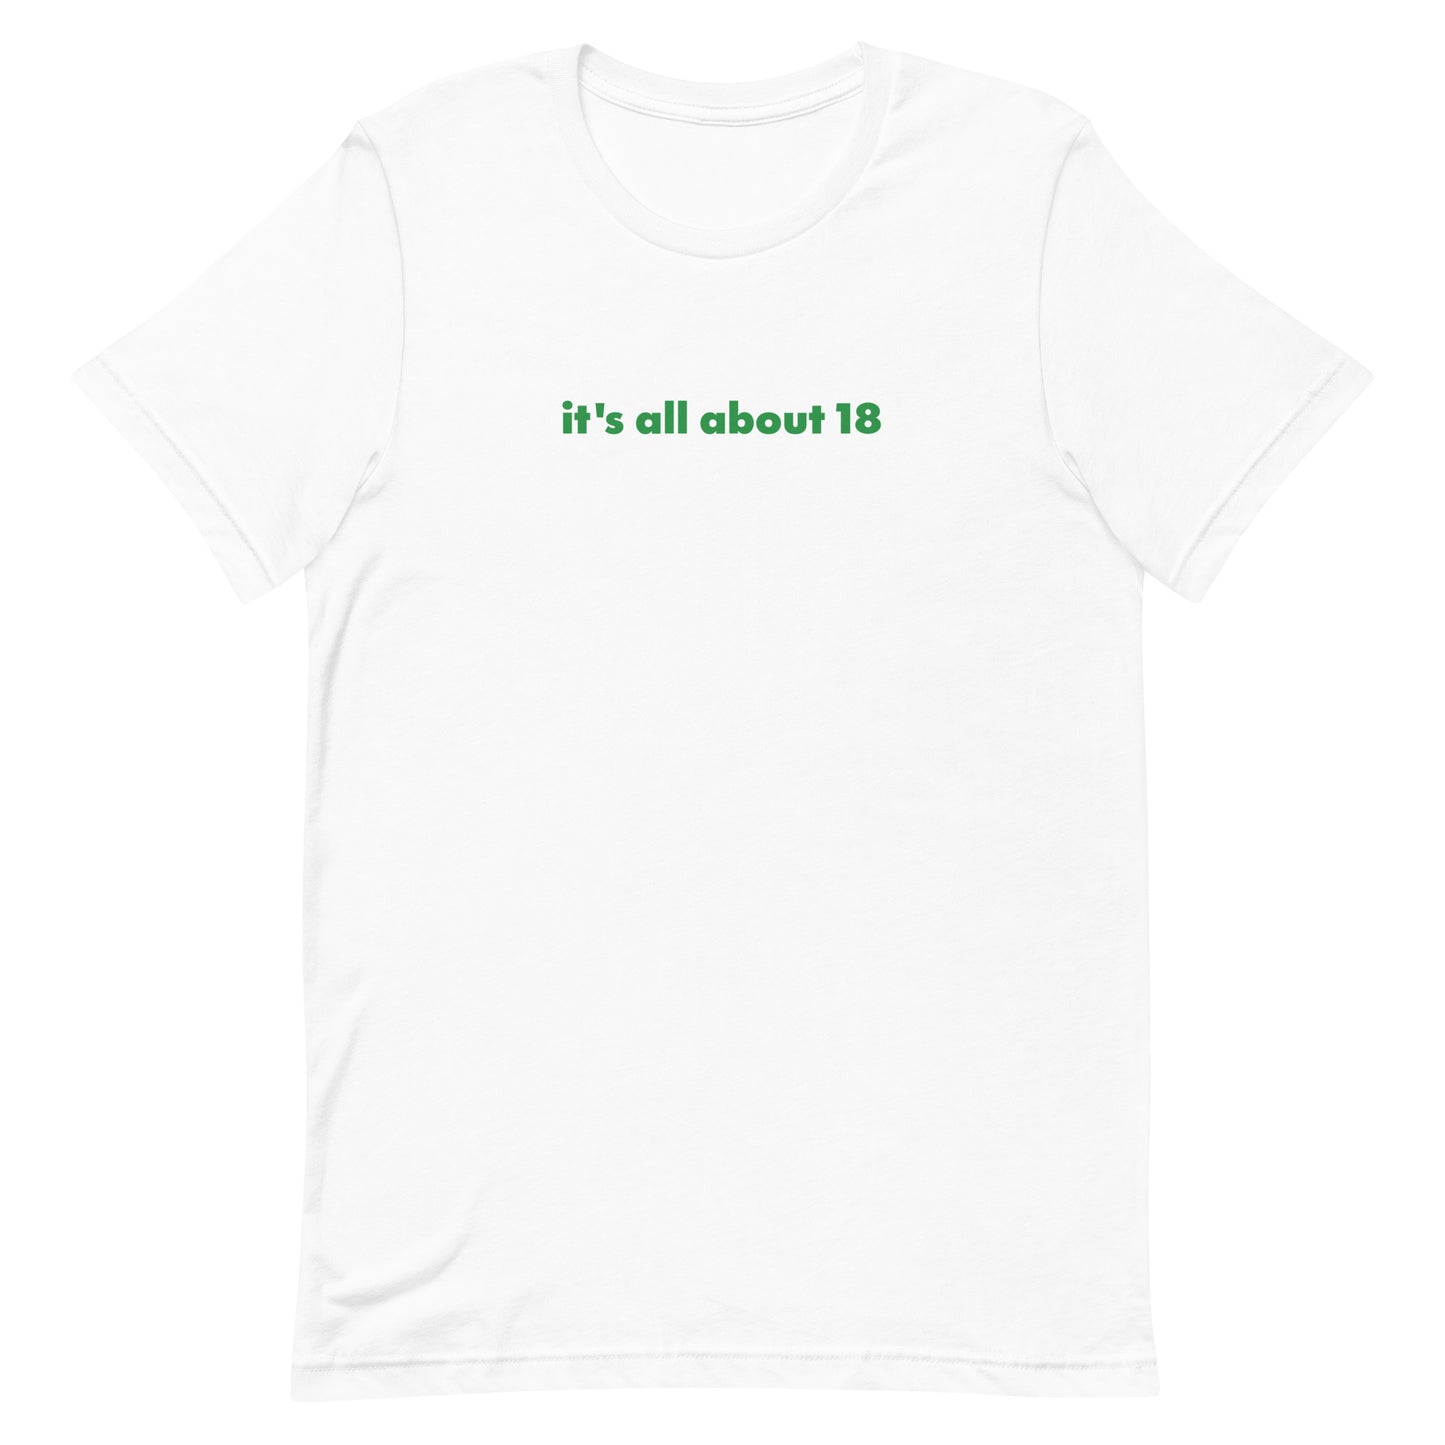 all about 18 t-shirt